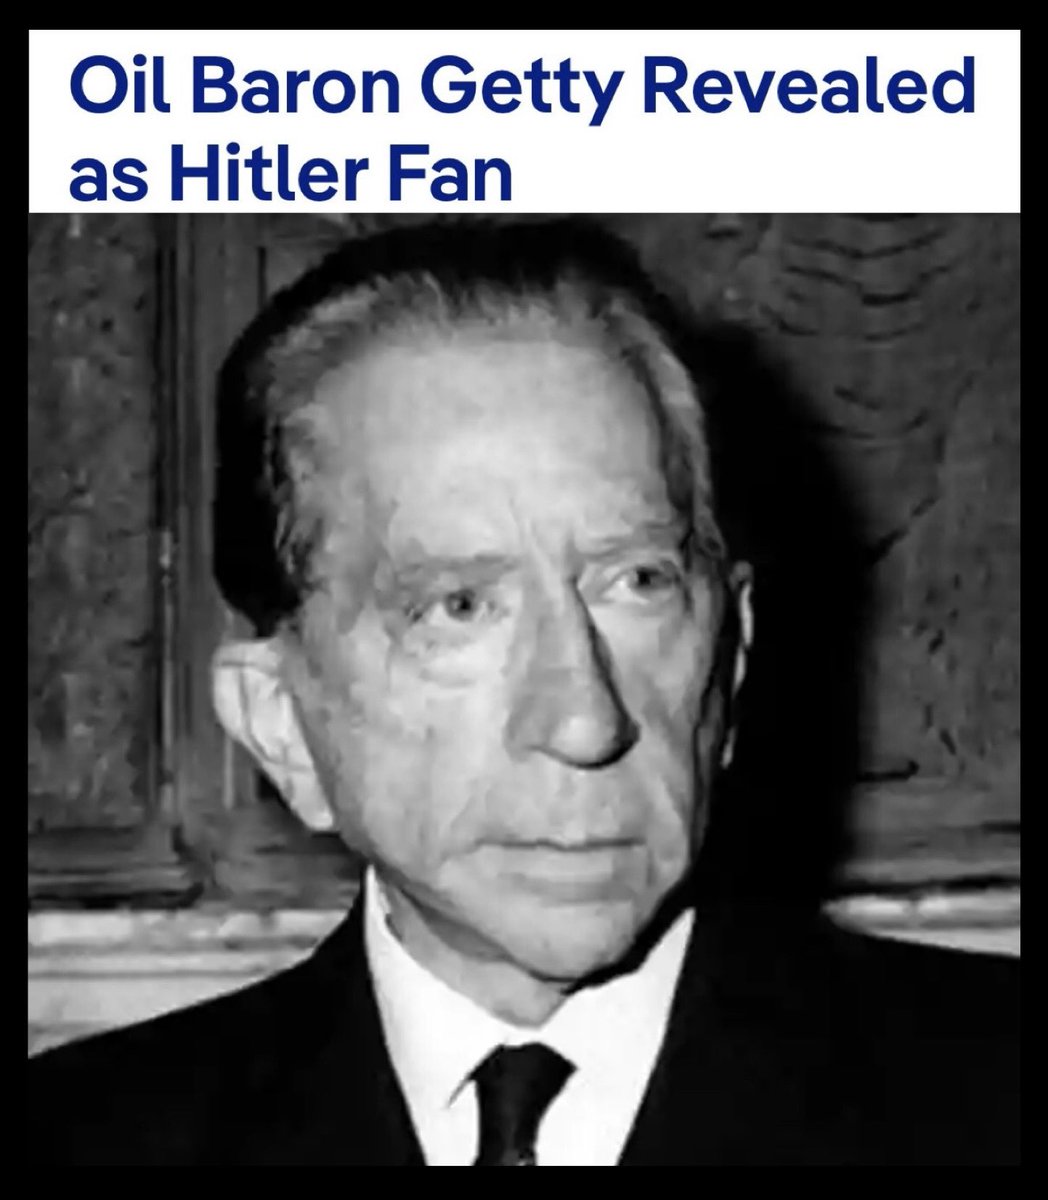 Getty appears to have been at the center of a shadowy group of financiers that provided support to Nazi Germany in the early days of World War II. The dossier says Getty sold one million barrels of oil to Germany. dw.com/en/oil-baron-g…